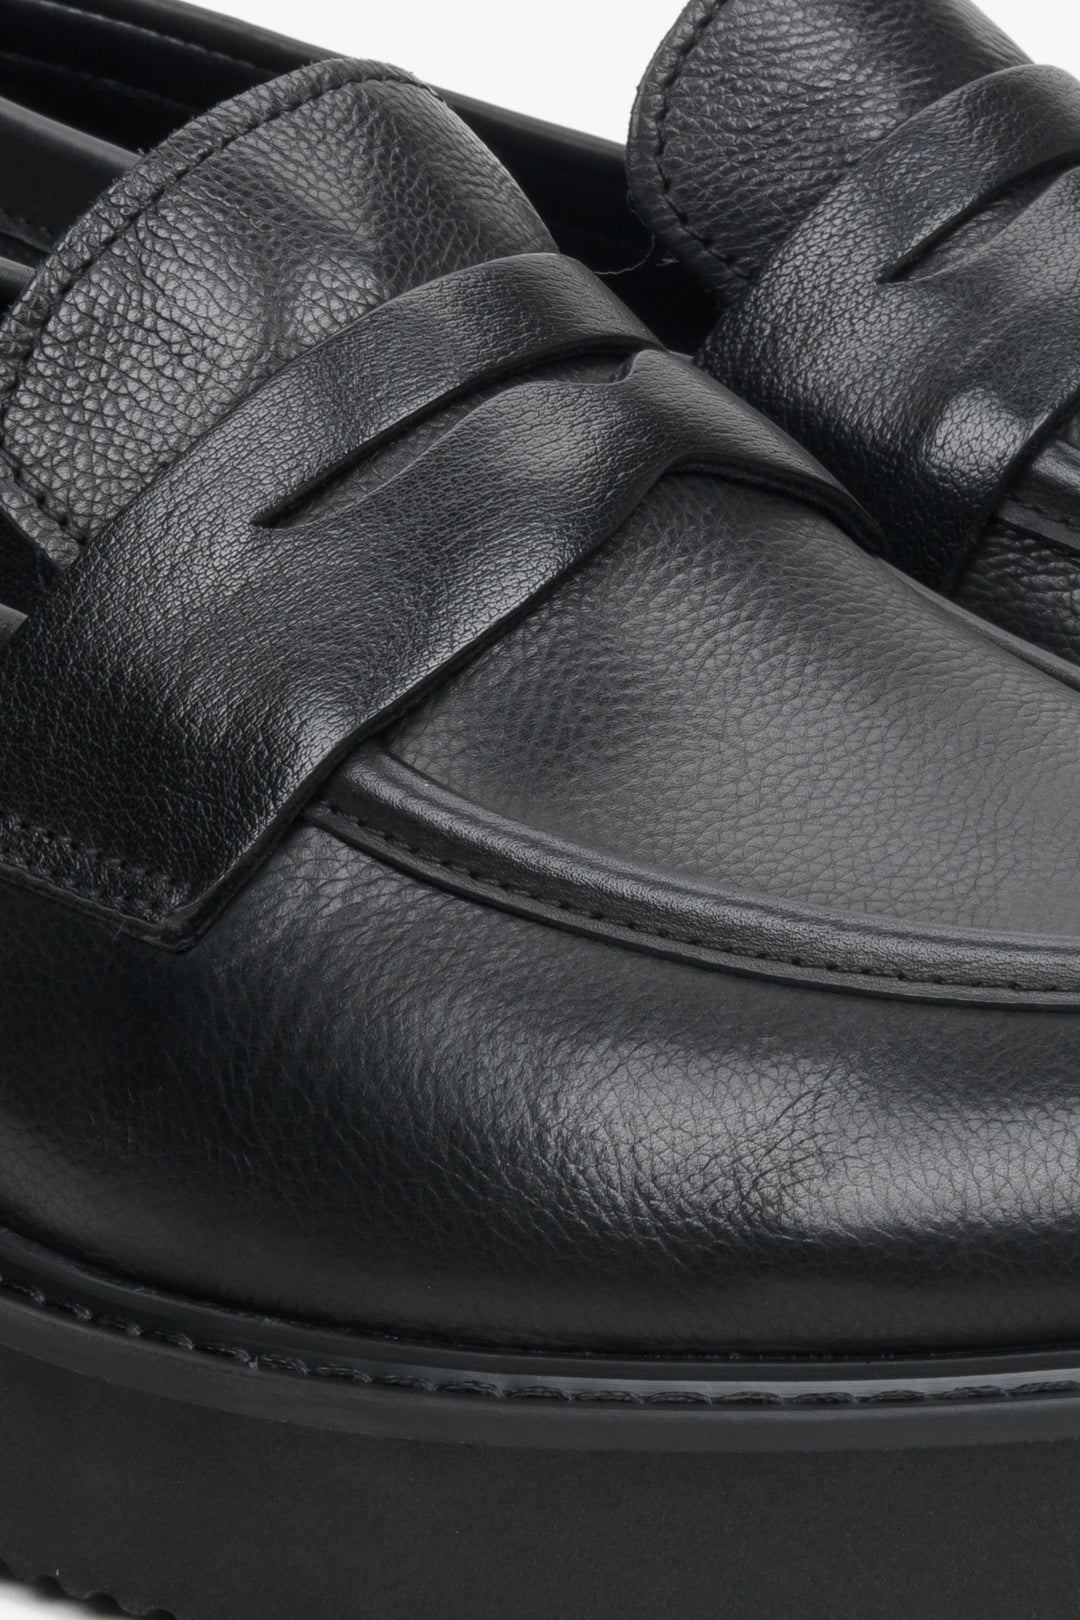 Men's black leather Estro loafers - close-up on the stitching pattern.